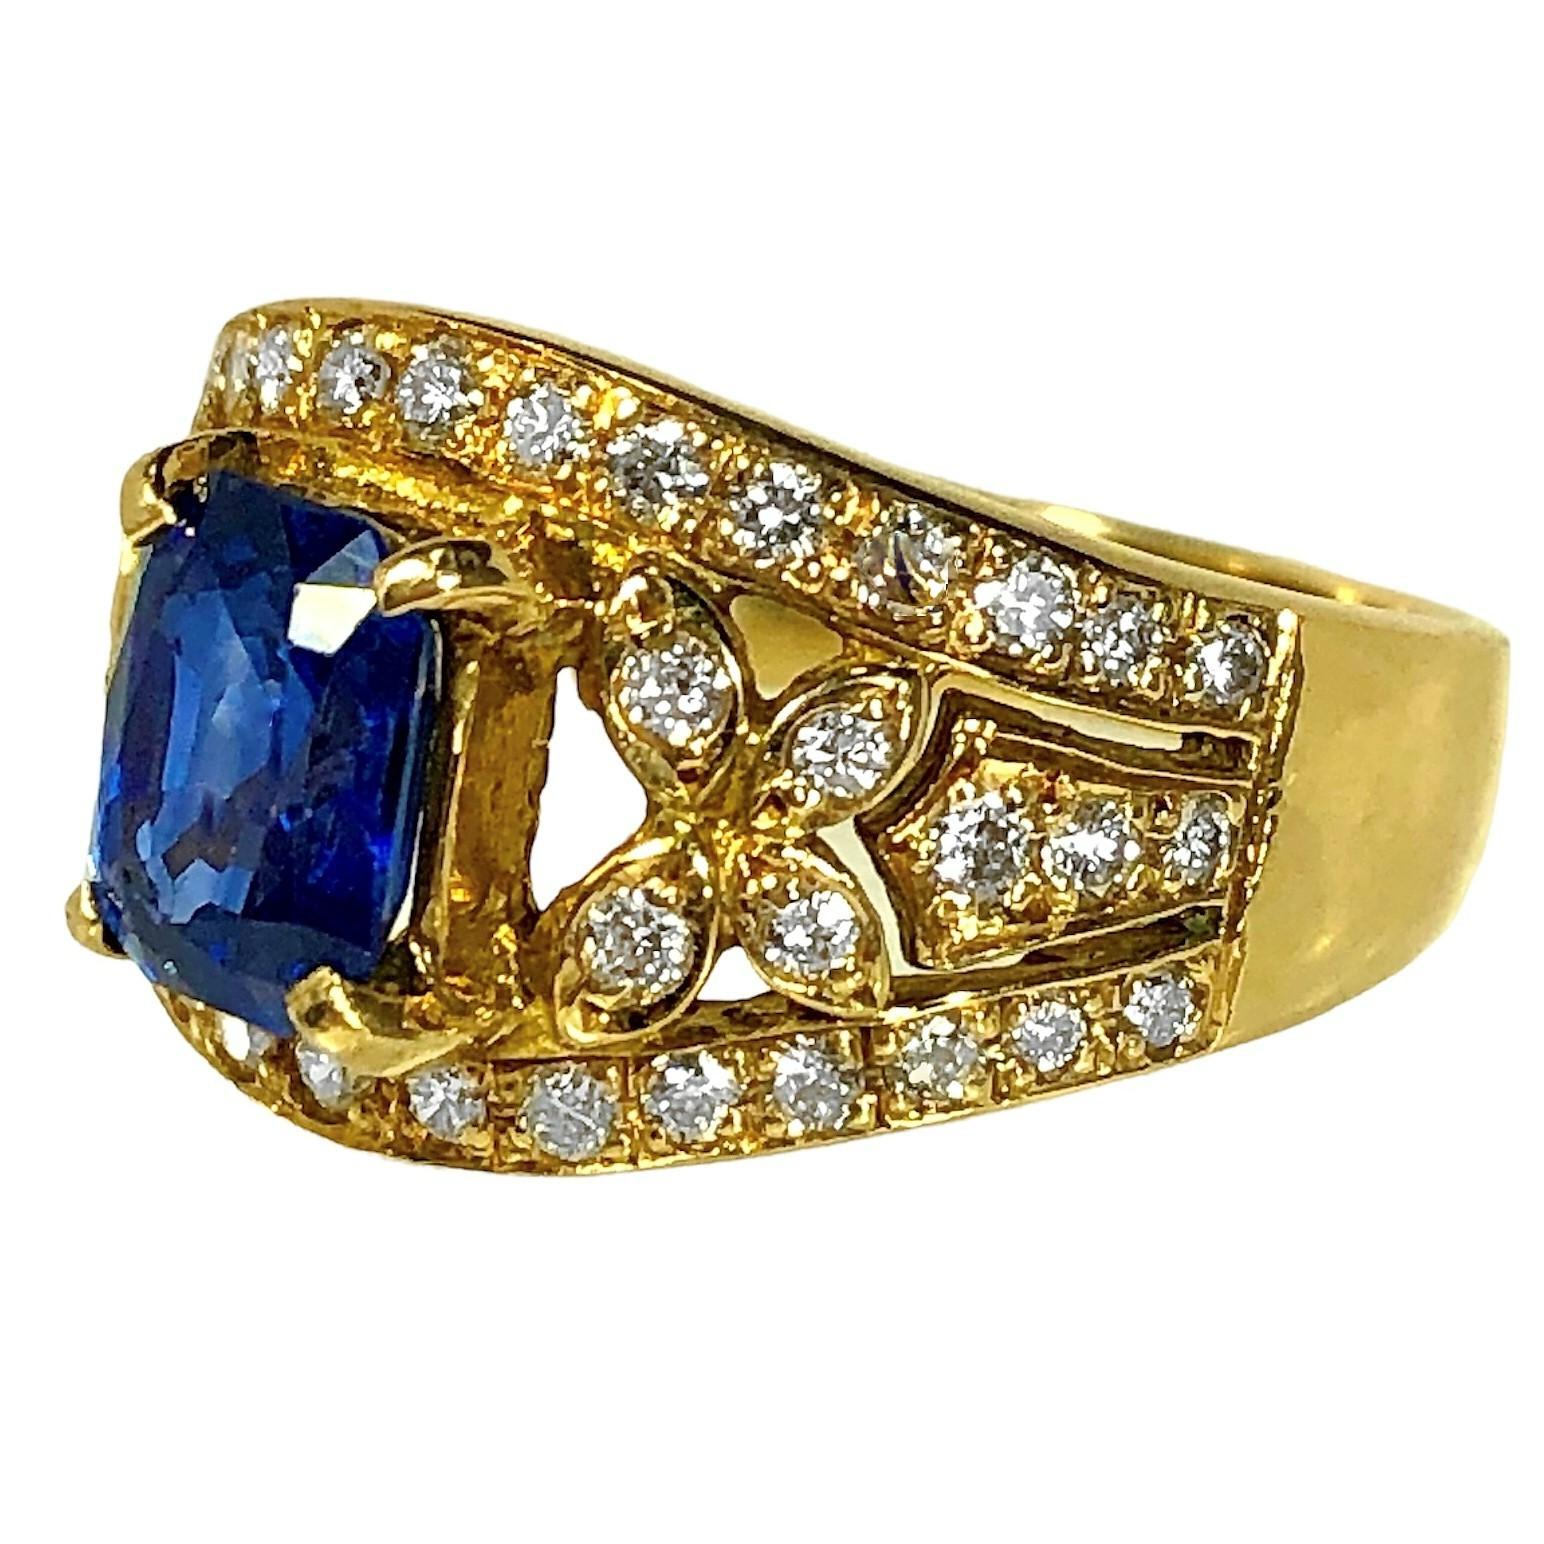 Contemporary 18K Yellow Gold, Diamond and Sapphire Cocktail Ring For Sale